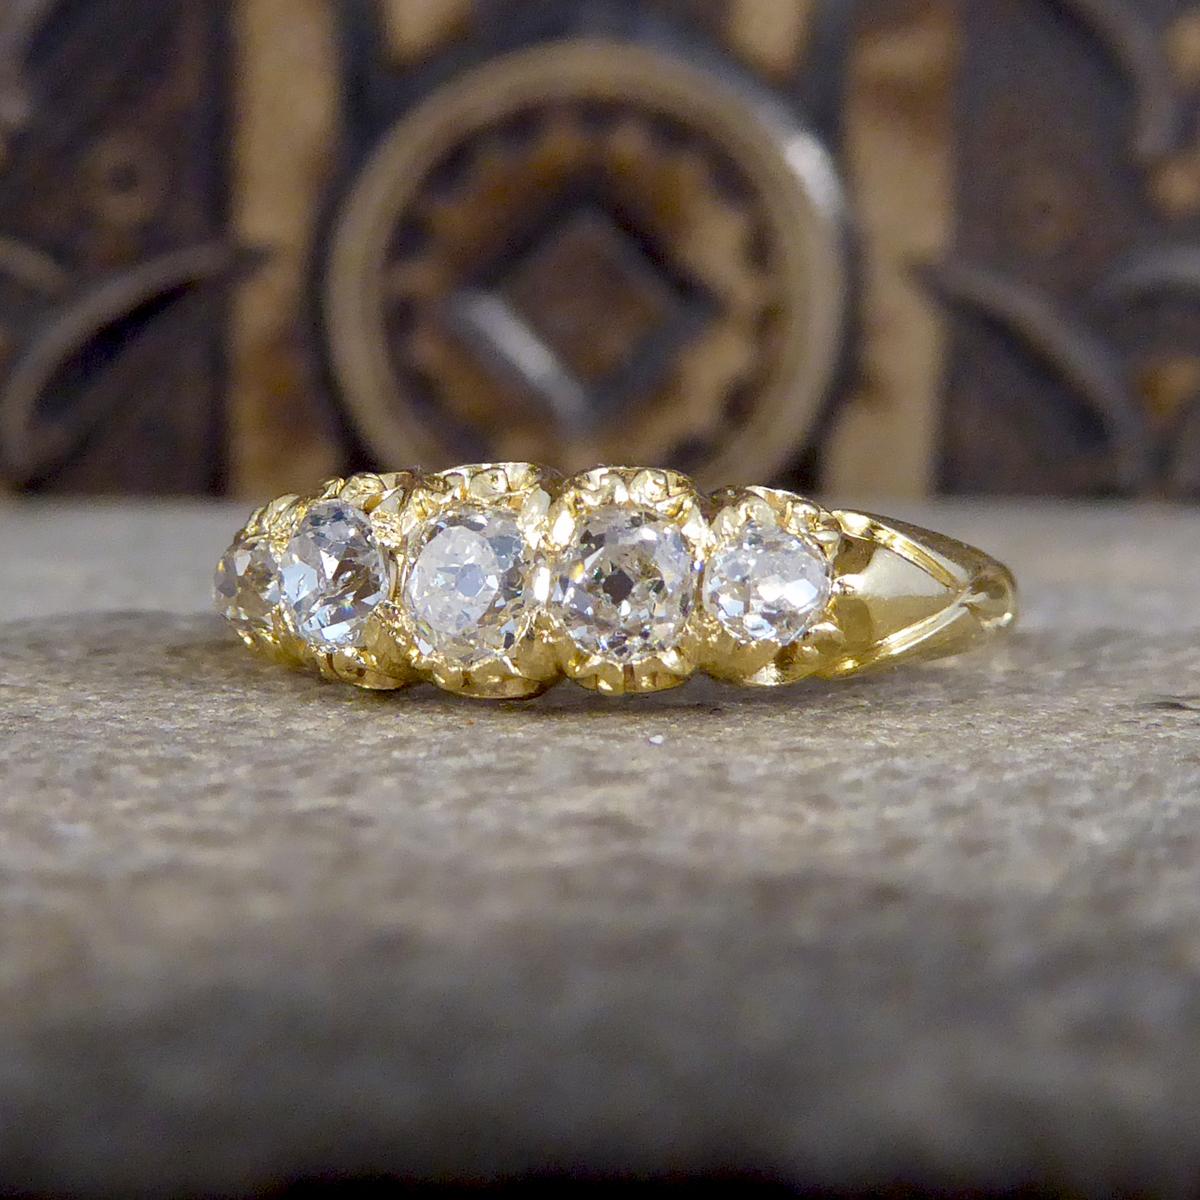 Antique Late Victorian Five Stone Diamond Cushion Cut Ring in 18ct Yellow Gold 1